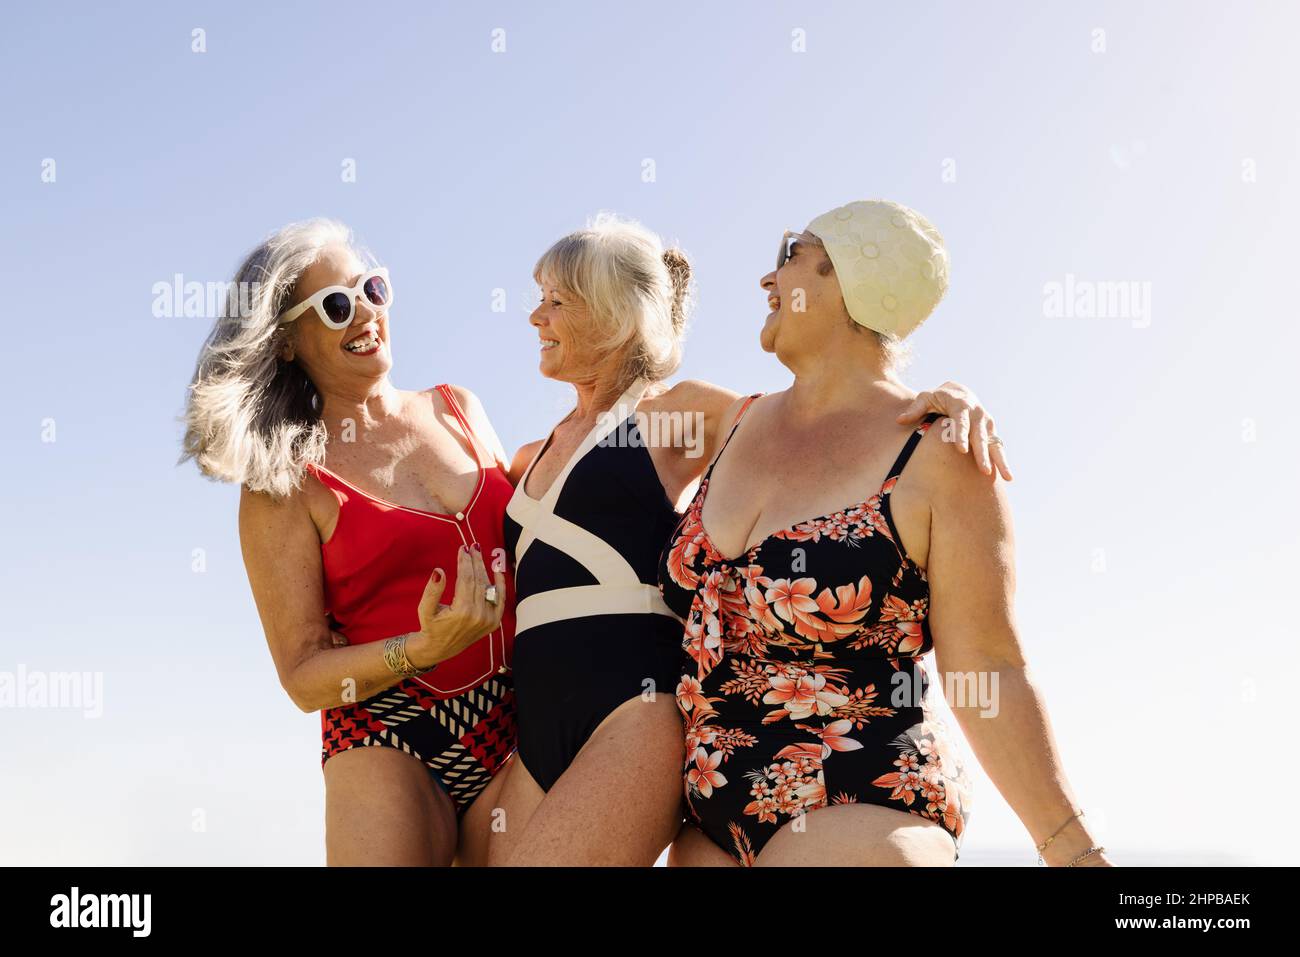 Group of cheerful elderly women having fun during summer vacation. Happy senior women laughing and embracing each other while wearing swimsuits. Matur Stock Photo